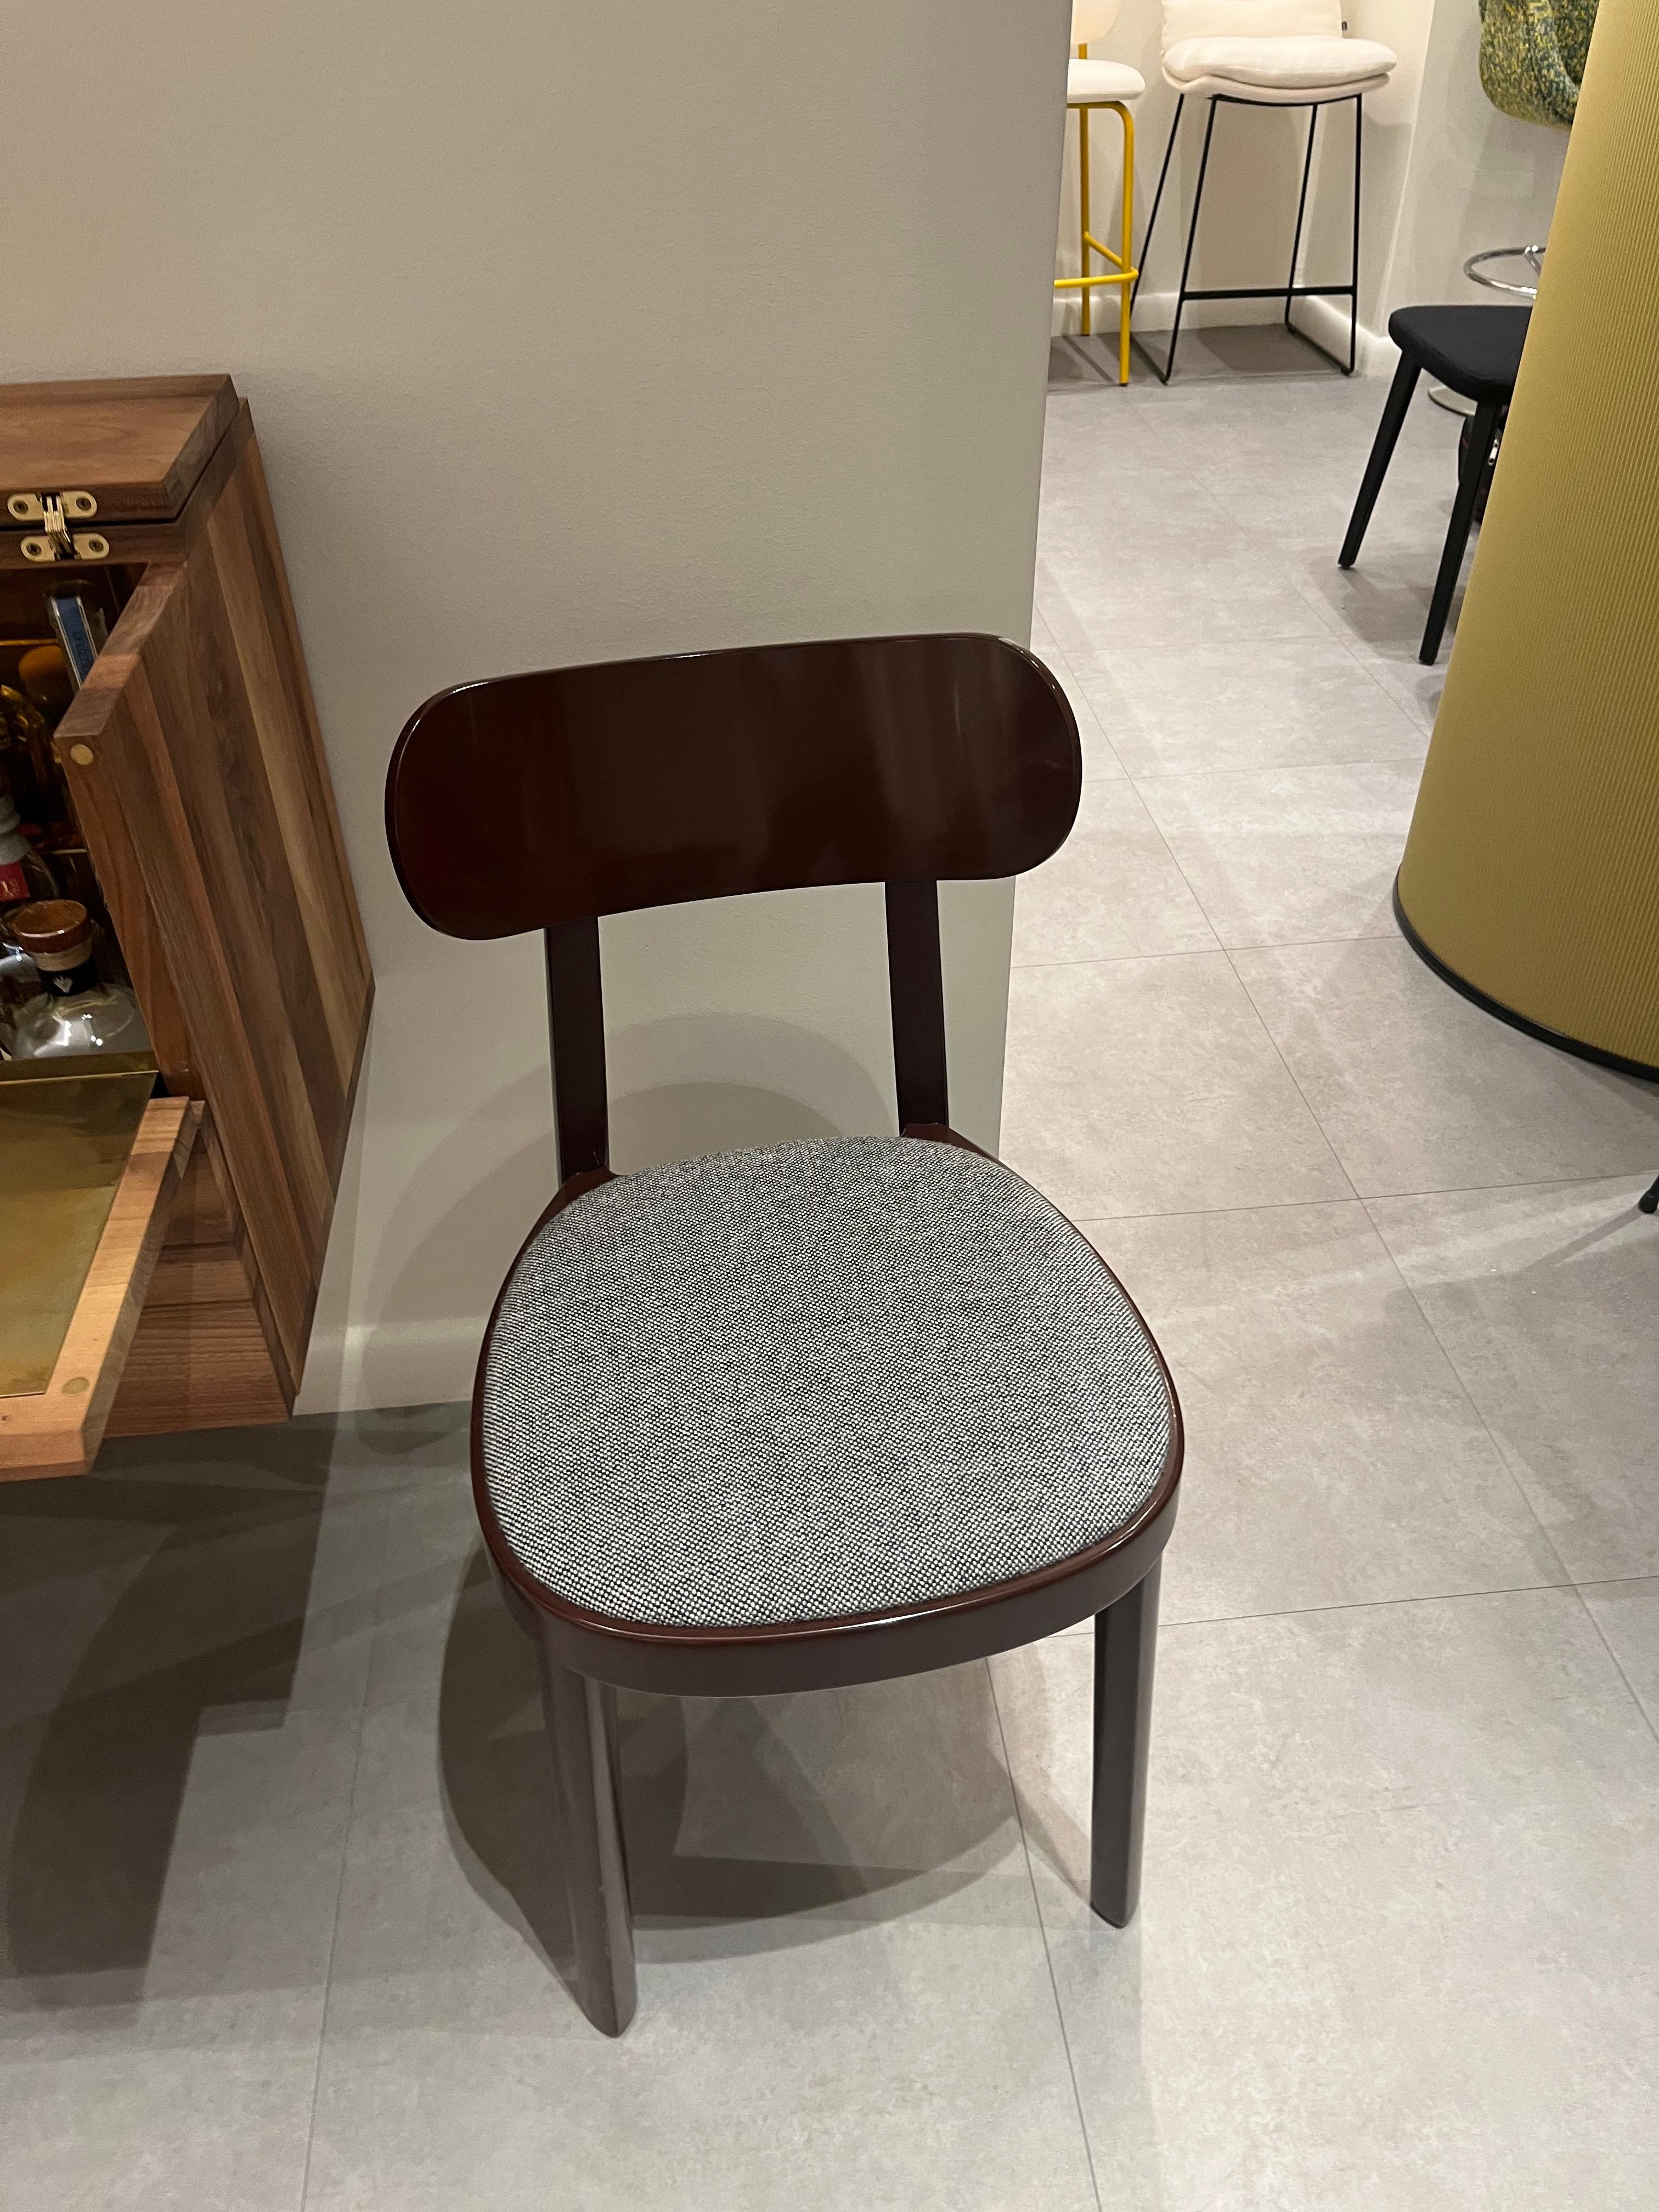 118 SP – High Gloss upholstered woodenchair
Frame: beech high gloss lacquered
dark brown violet
41 Fabric: Hallingdal 65 126
mélange
Glides: plastic
Minimalistic and honest, at the same time elegant and filigree
Minimalistic and honest, at